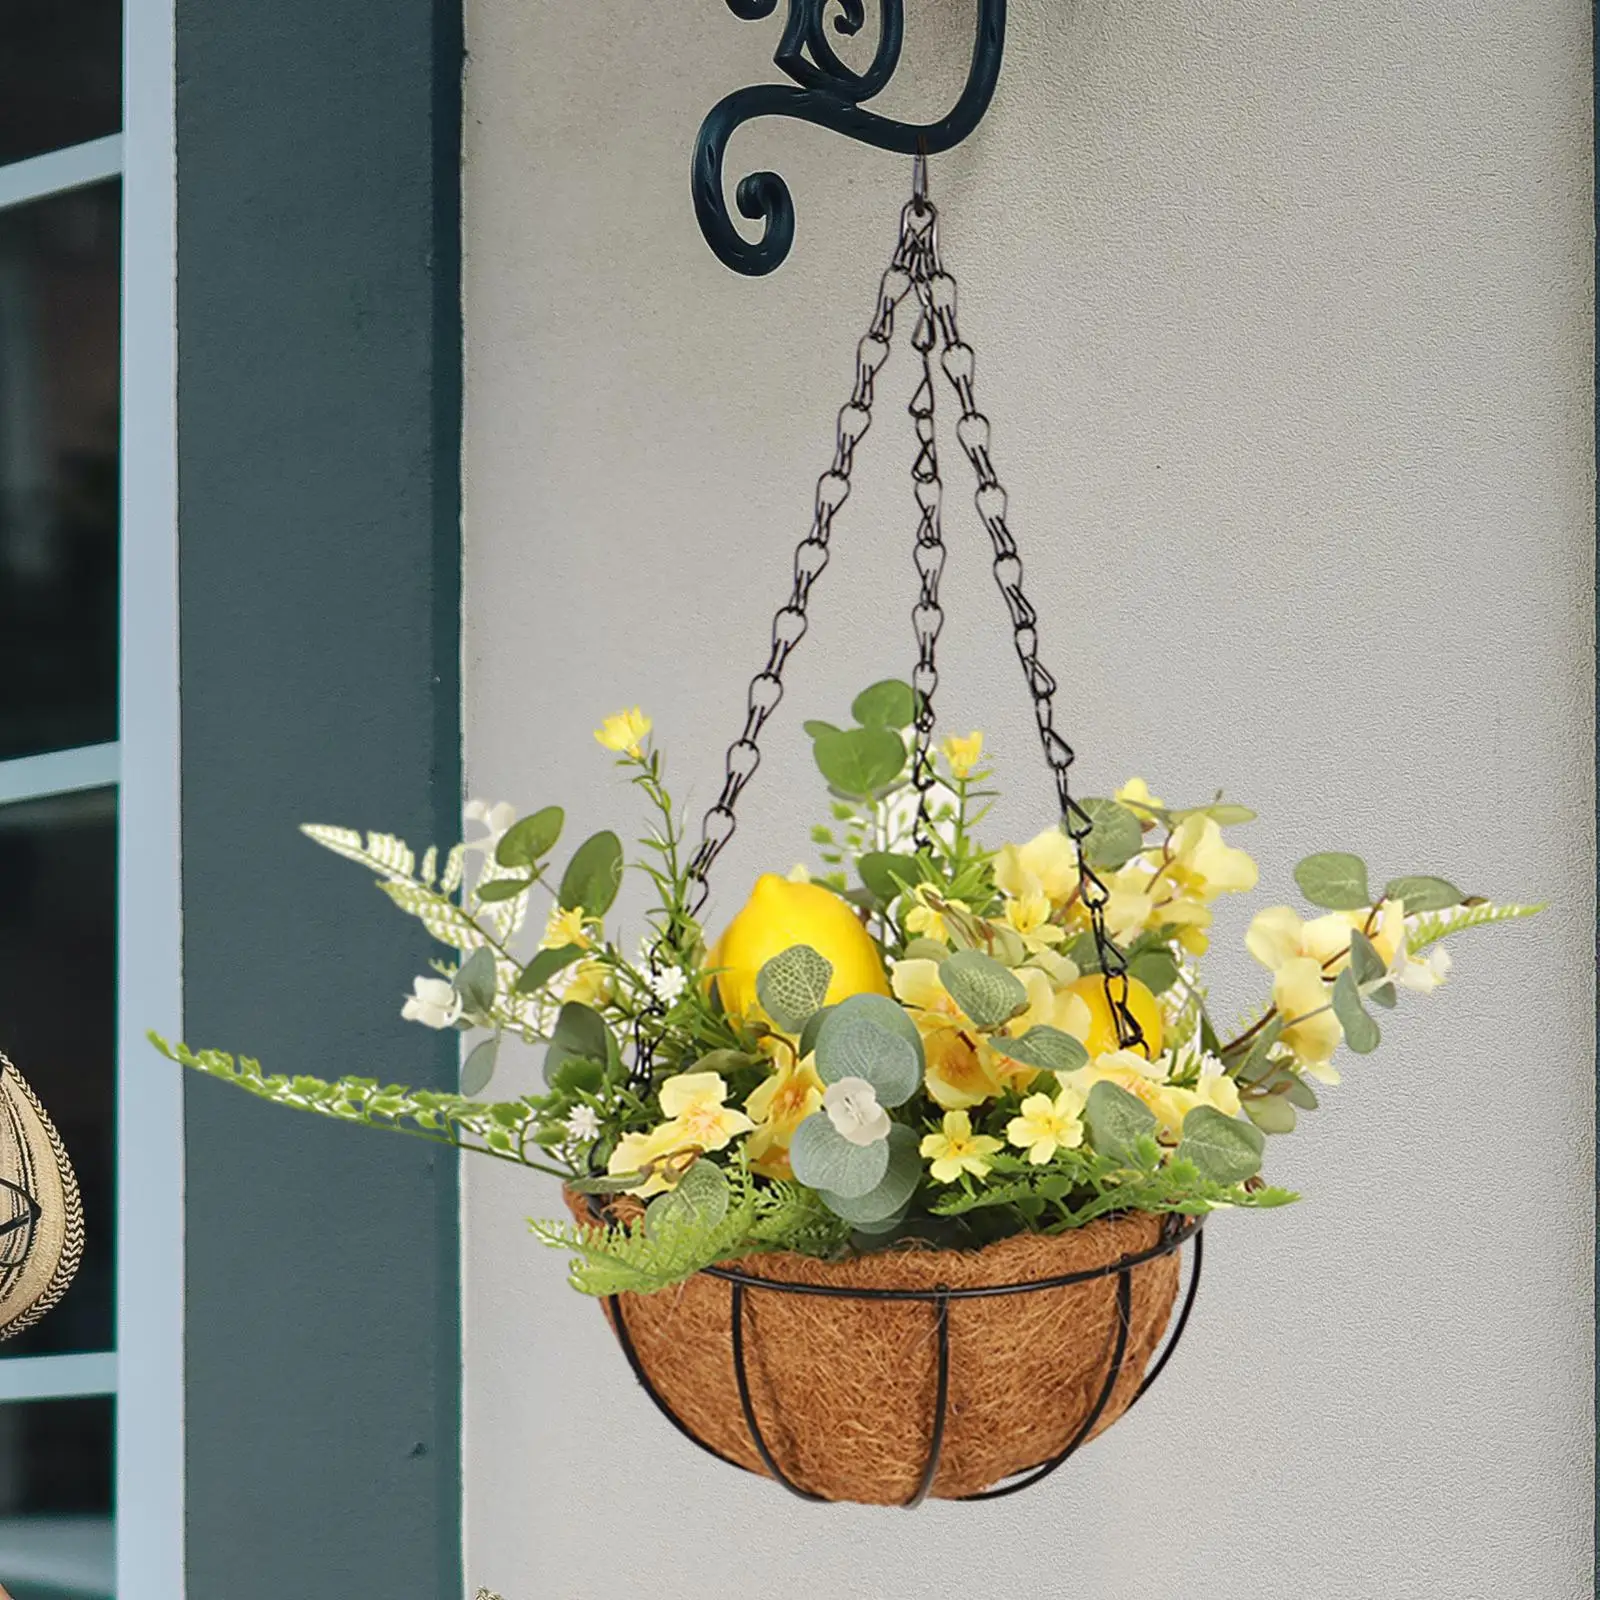 Artificial Flowers Basket Ornament Fake Hanging Plant for Patio Porch Yard